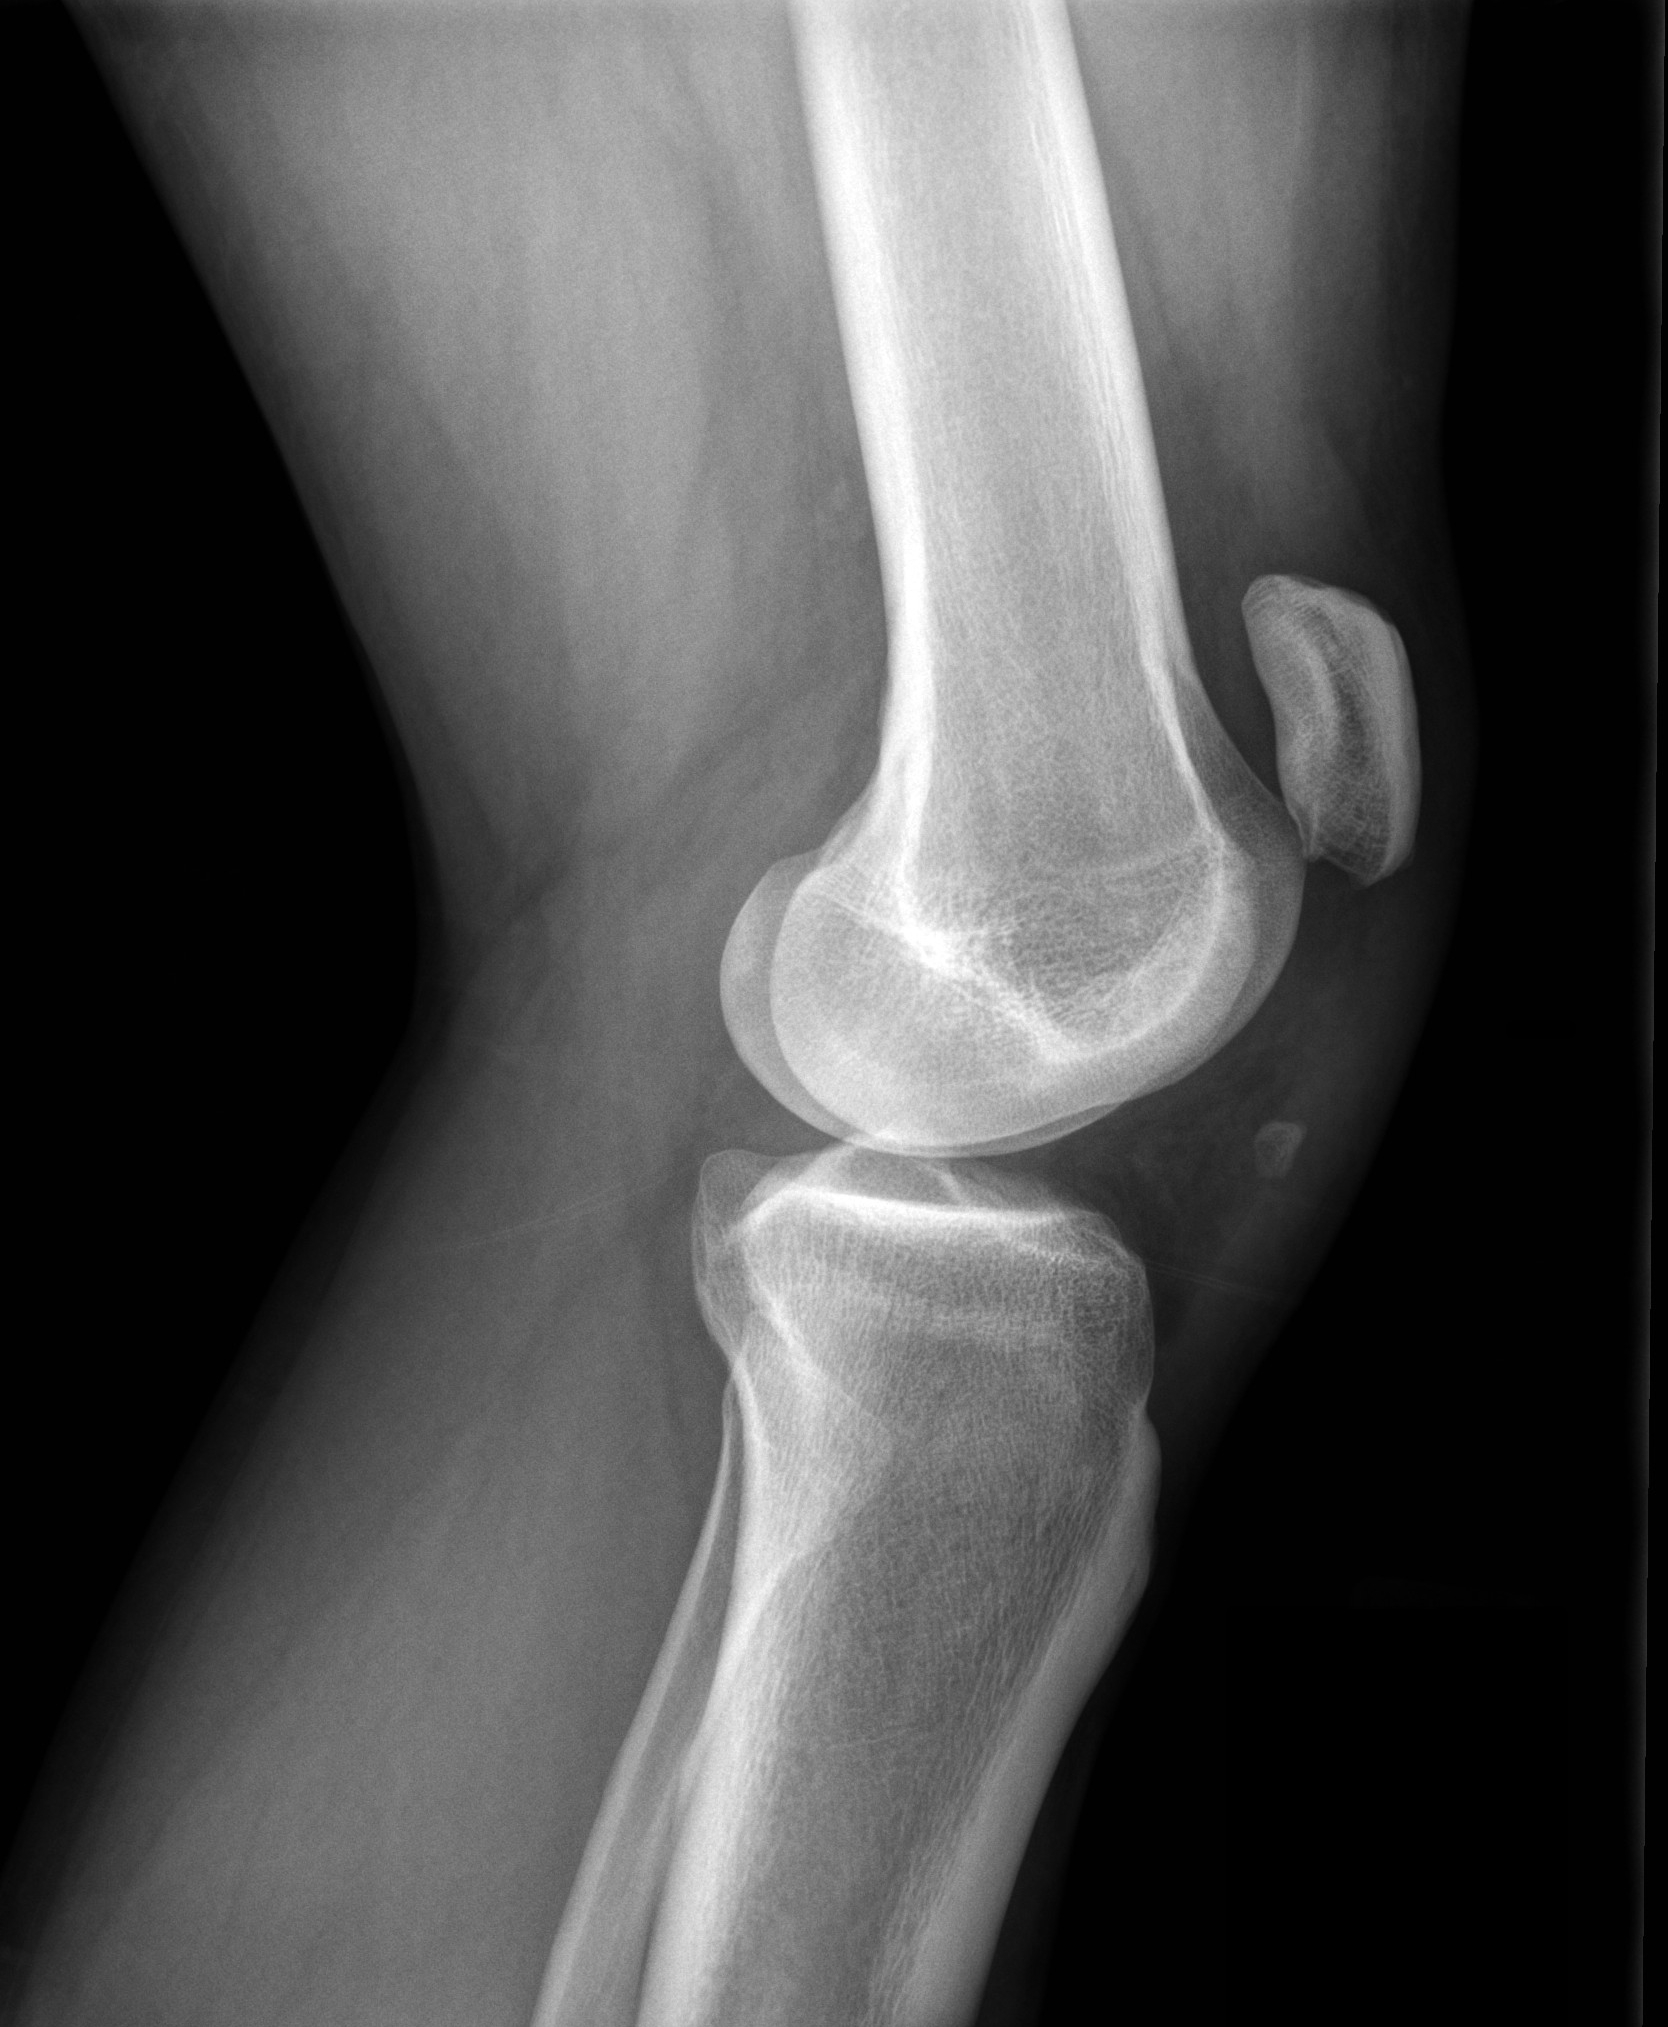 X-ray is shown. 